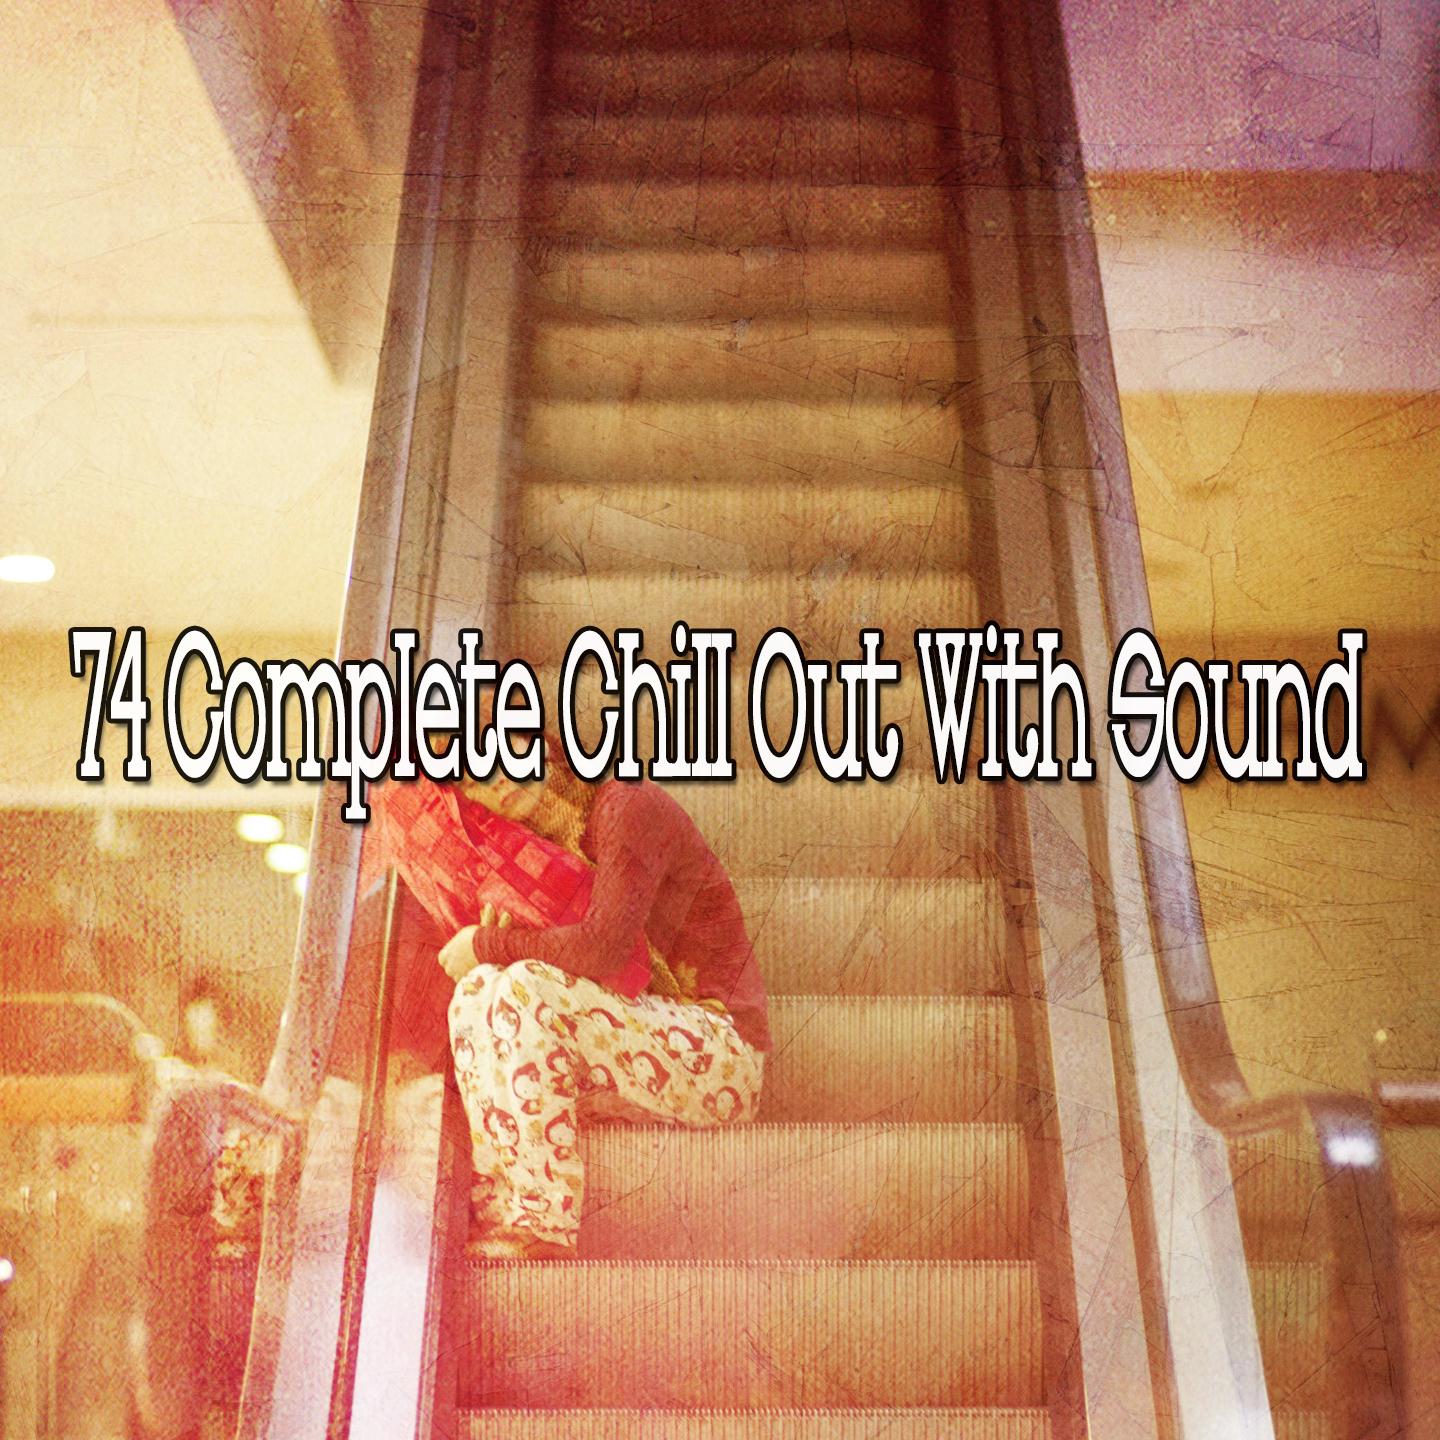 74 Complete Chill out with Sound